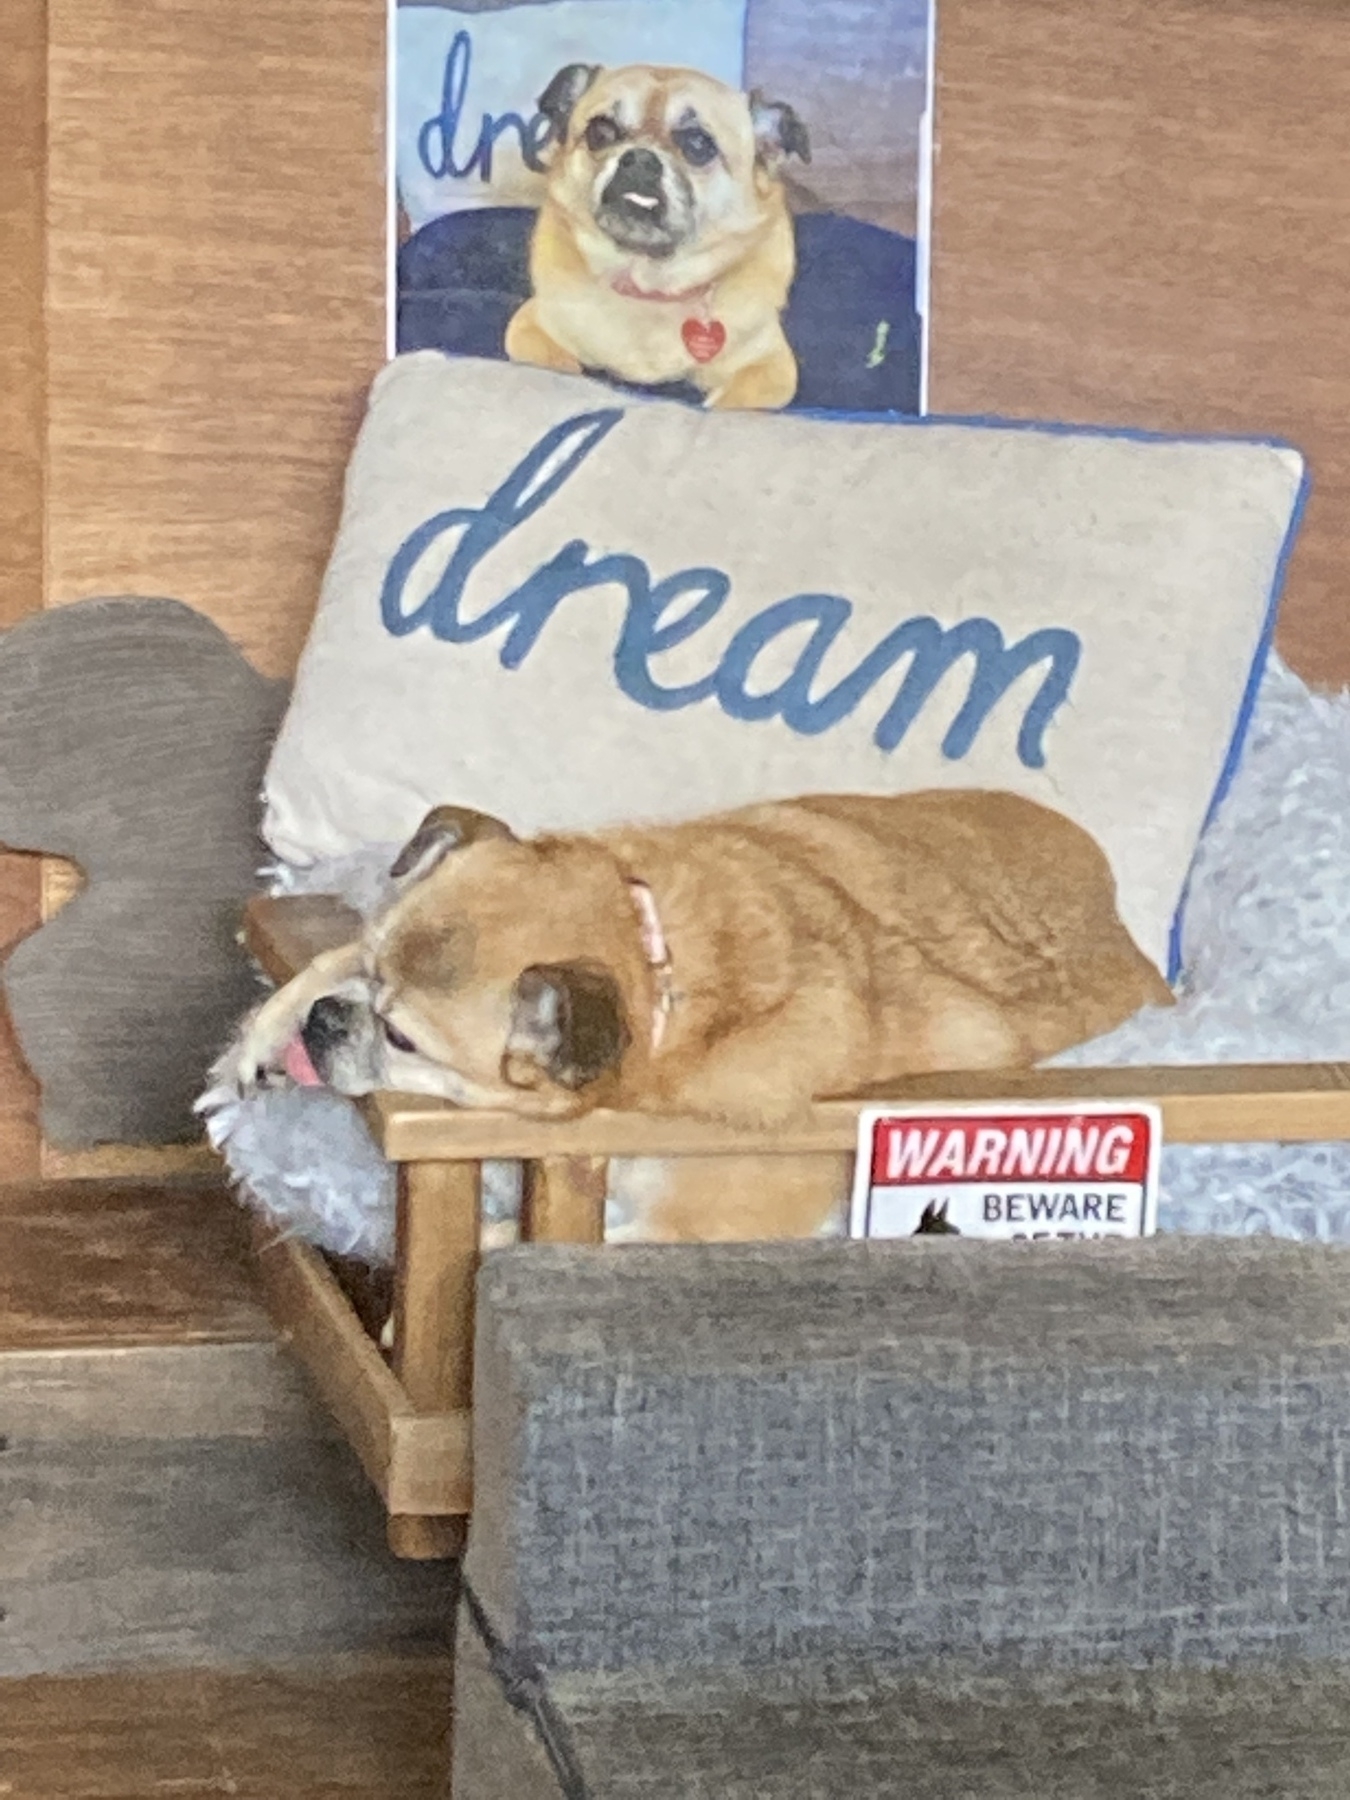 A photo of a sleeping dog; a pillow embroidered with “Dream” above it, and a “Beware” sign below 